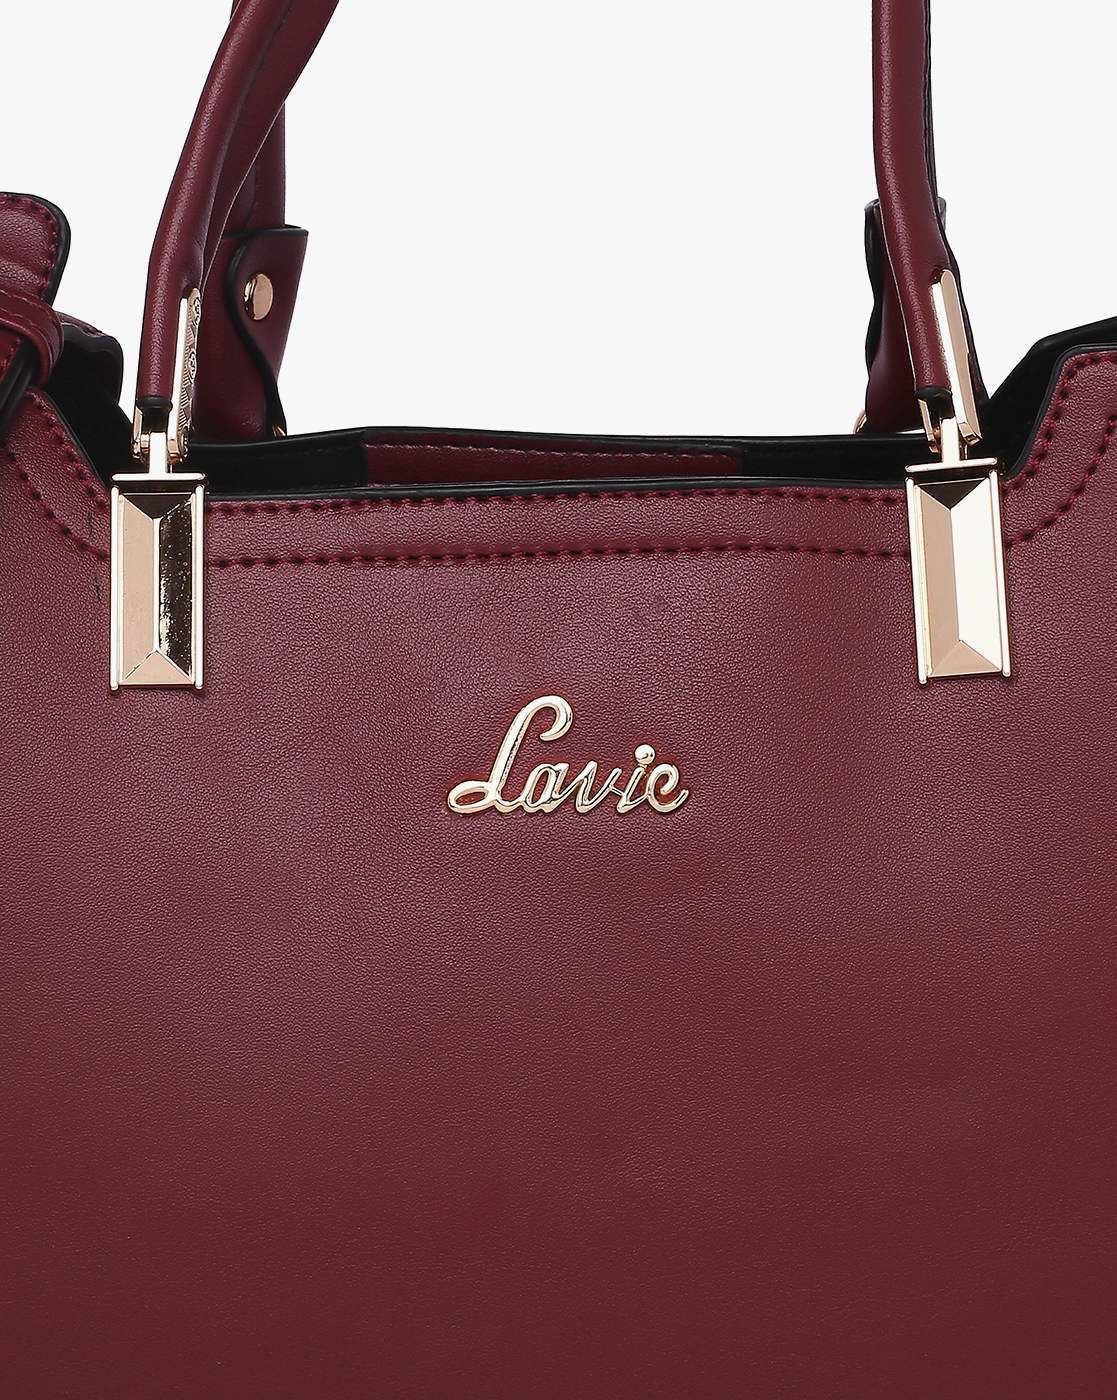 Lavie - BAG 'EM ALL! Stop everything and splurge on the best of deals at  UPTO 60% OFF at Lavie Valentine's Day Sale. #FickleItWithLavie HURRY UP and  SHOP NOW & get a